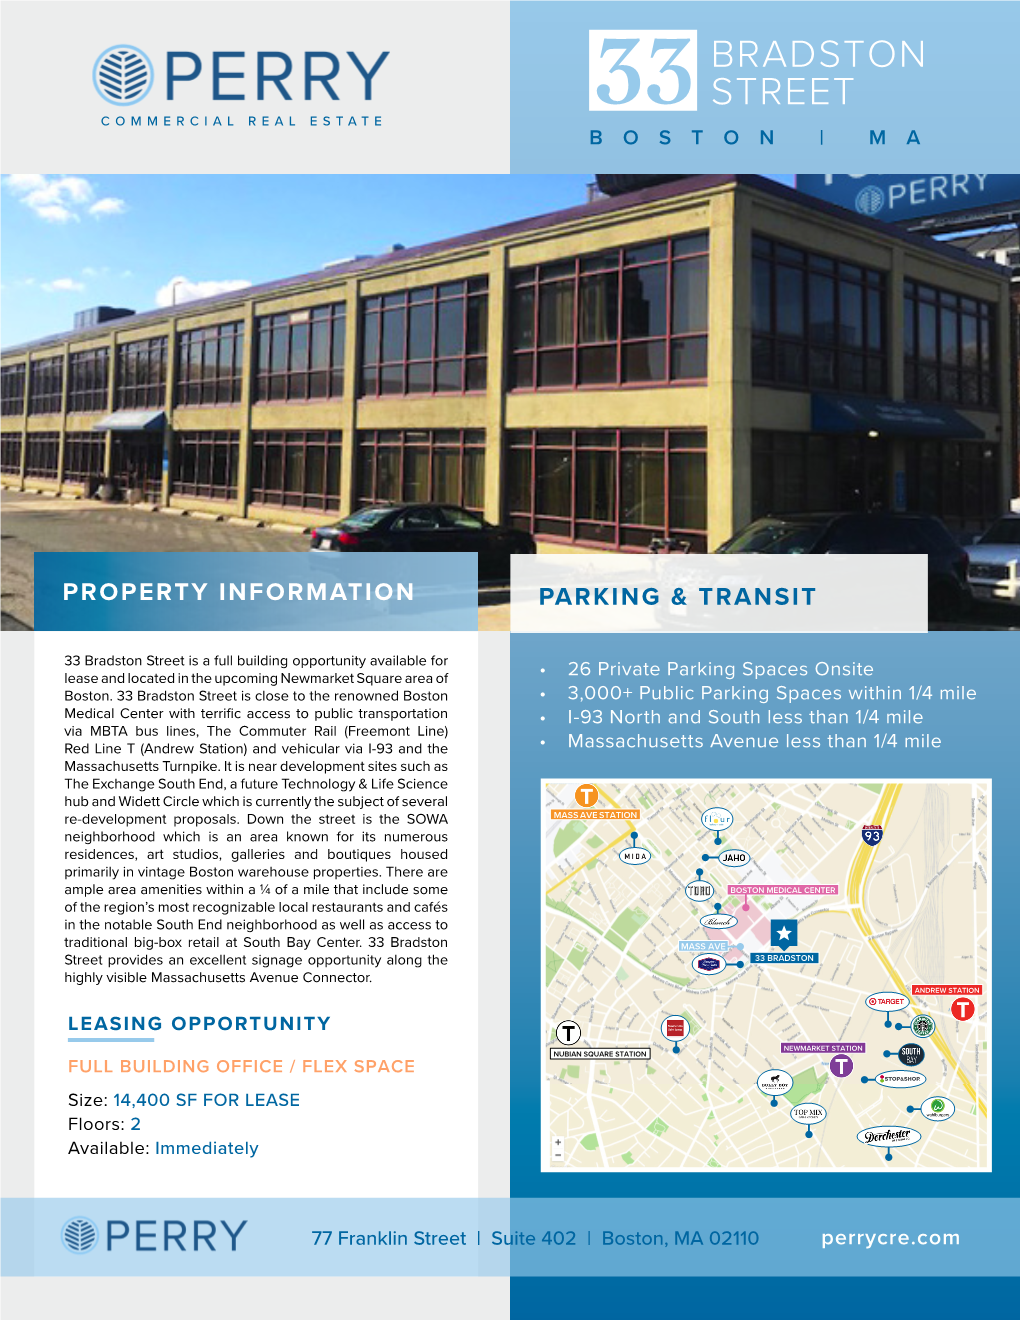 Bradston Street Is a Full Building Opportunity Available for Lease and Located in the Upcoming Newmarket Square Area of • 26 Private Parking Spaces Onsite Boston